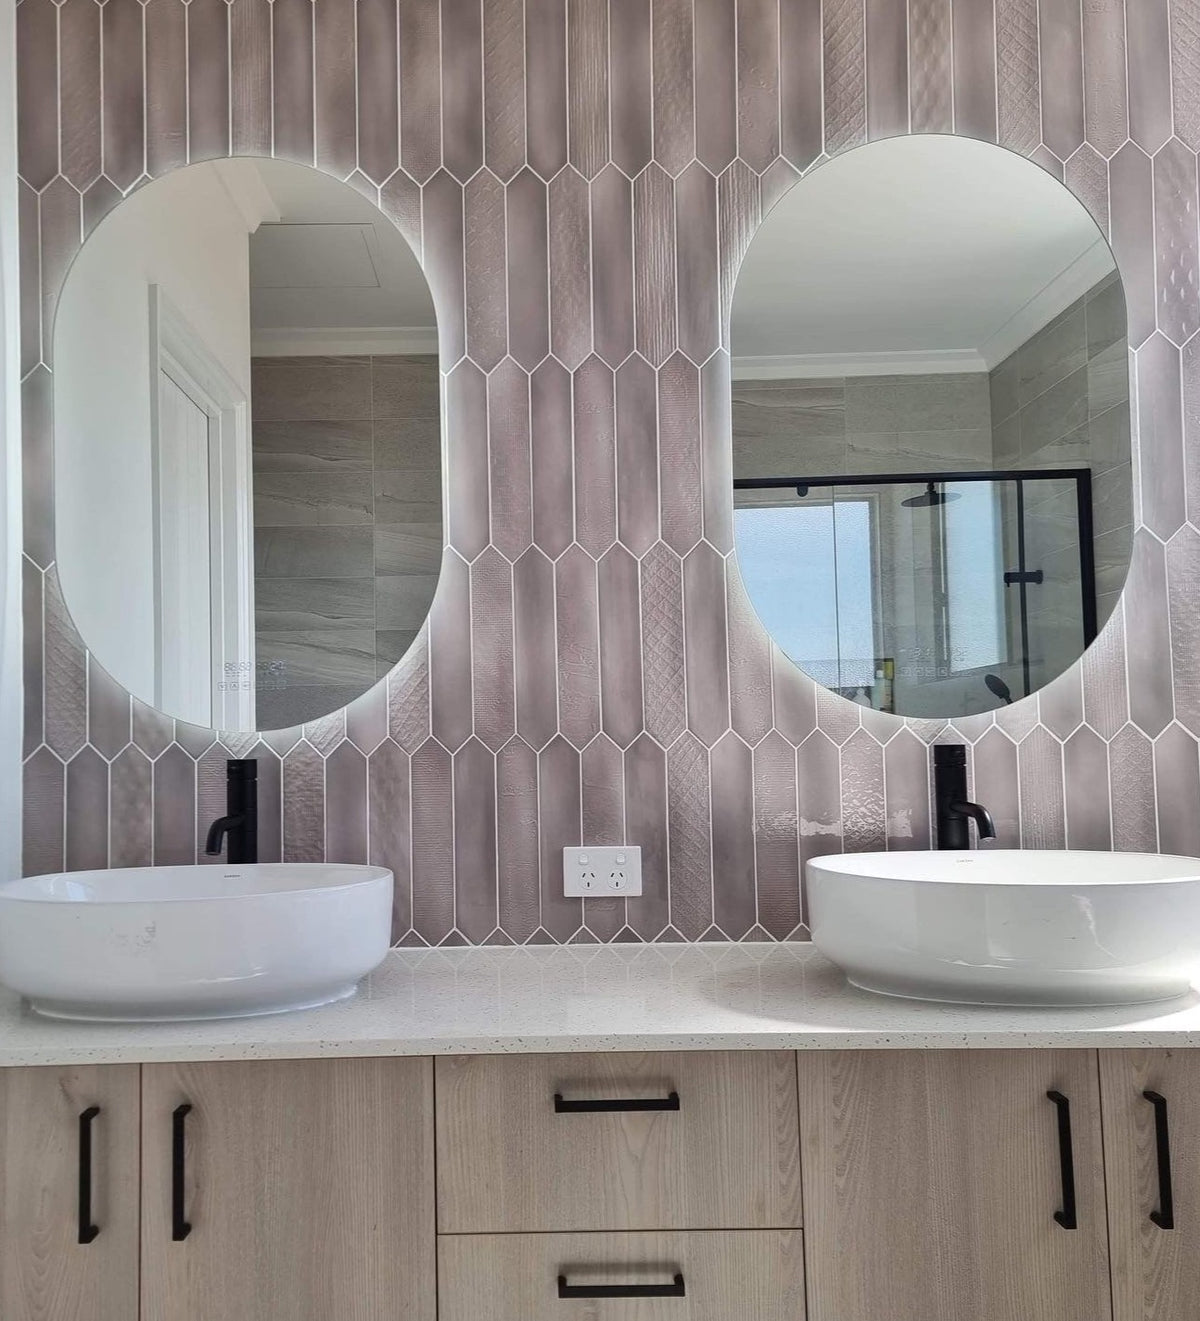 Pair of oval Smart LED mirrors and floating white and brown cabinet mounted on the picket-tiled wall